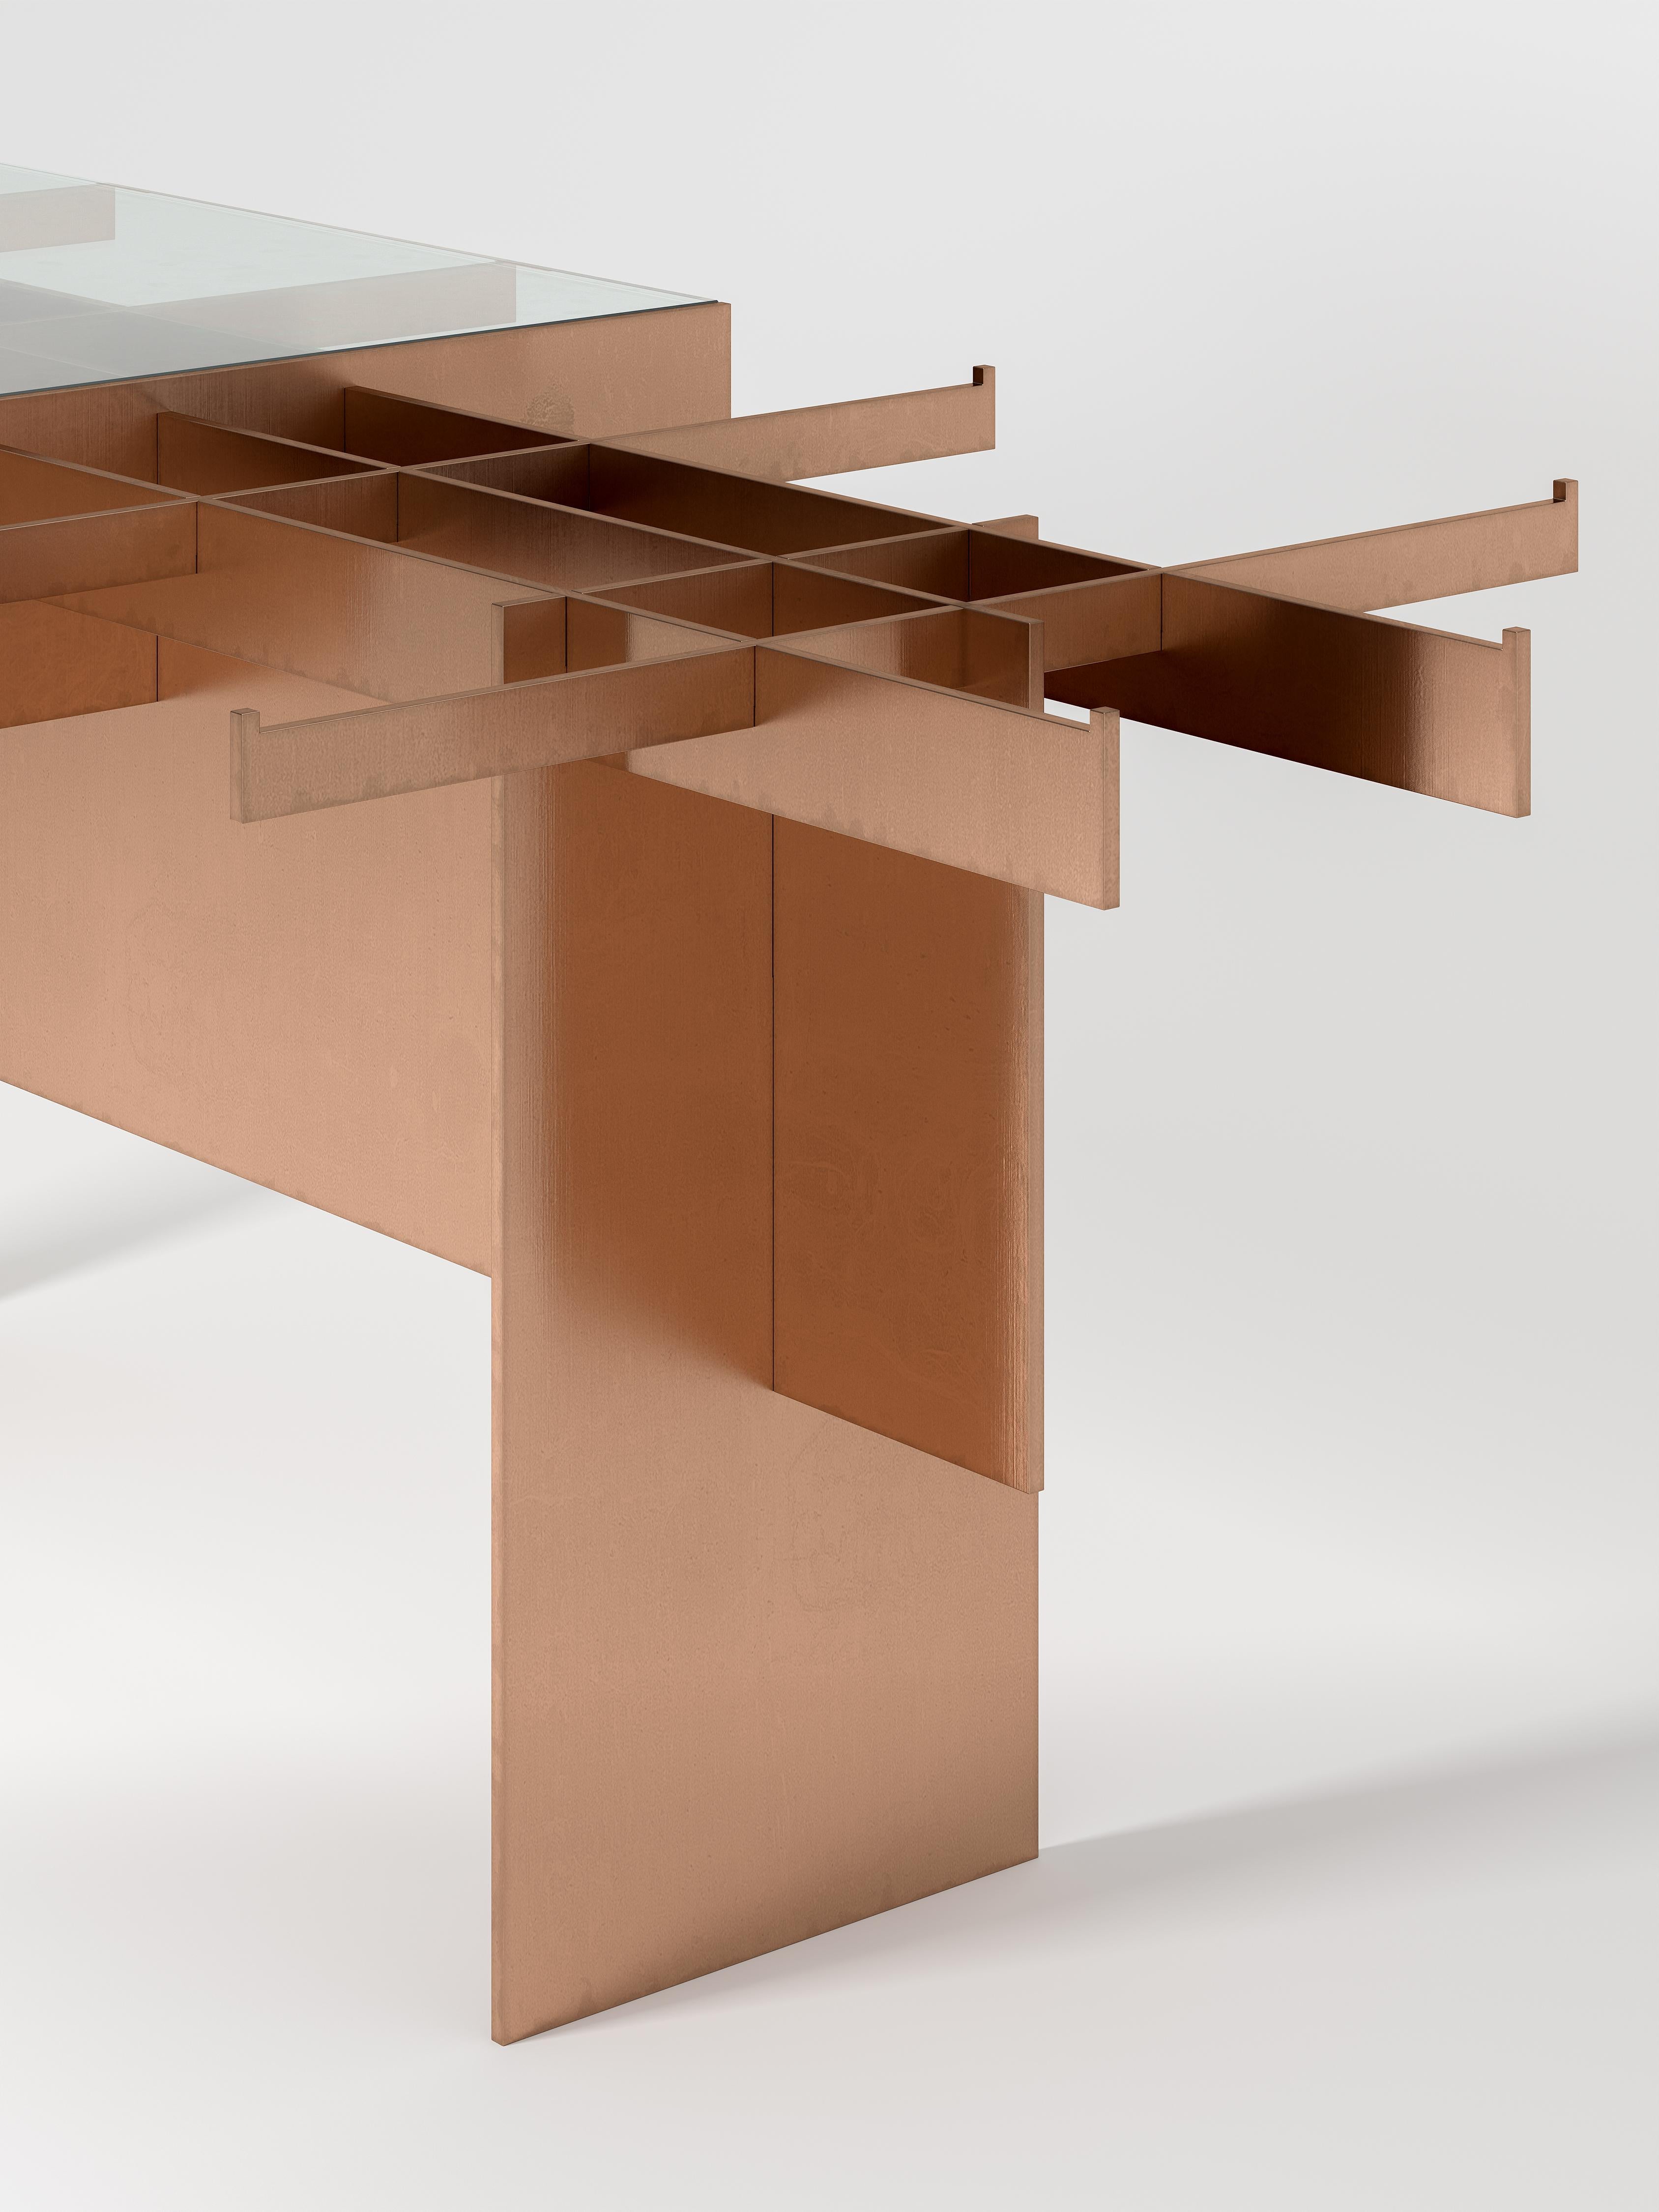 NMPBV1 is a dry joint copper and glass dining table part of a series of furniture items made from a standard metal carpentry process, which is 2D laser cut. From a single metal sheet, the objects are laser cut and dry assembled. ?NMPBV1 is made out